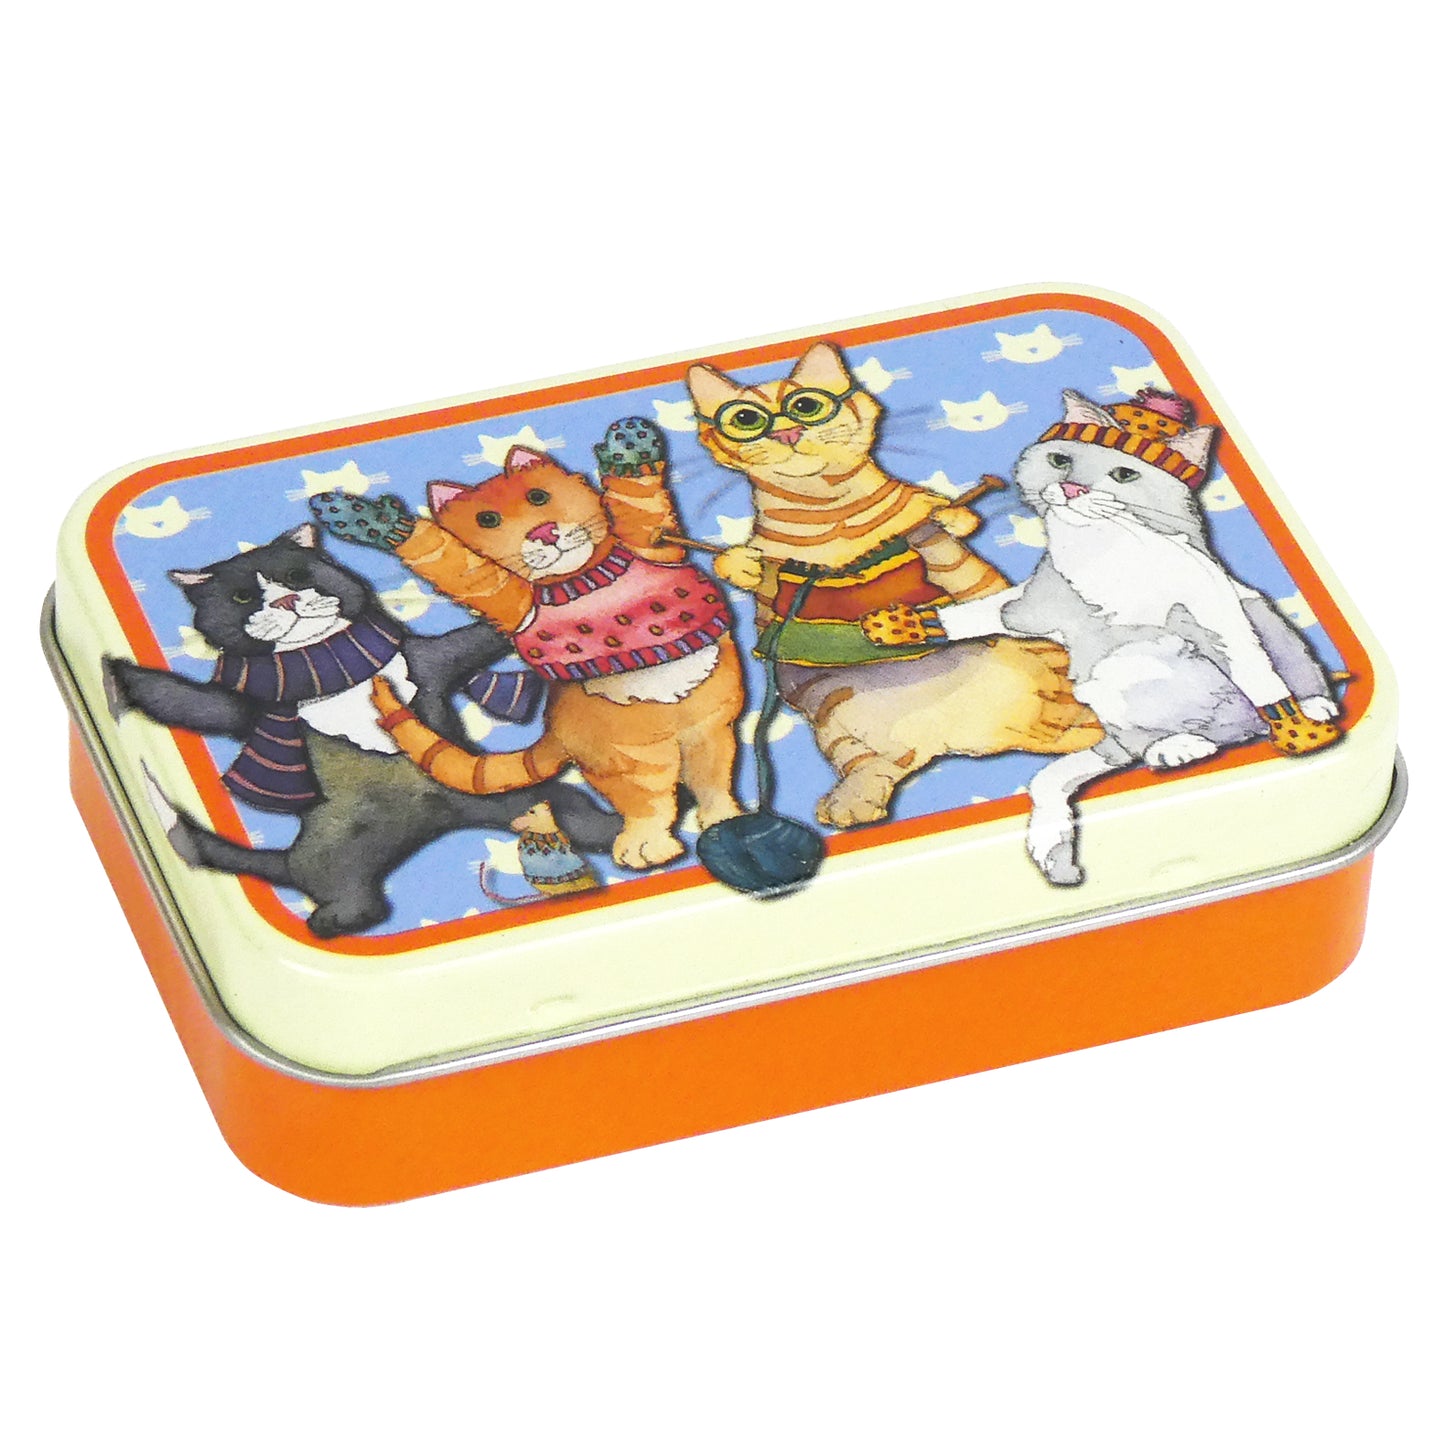 Rectangular tin with kittens in mittens design on blue background. Edge of top is cream and bottom half is orange. 